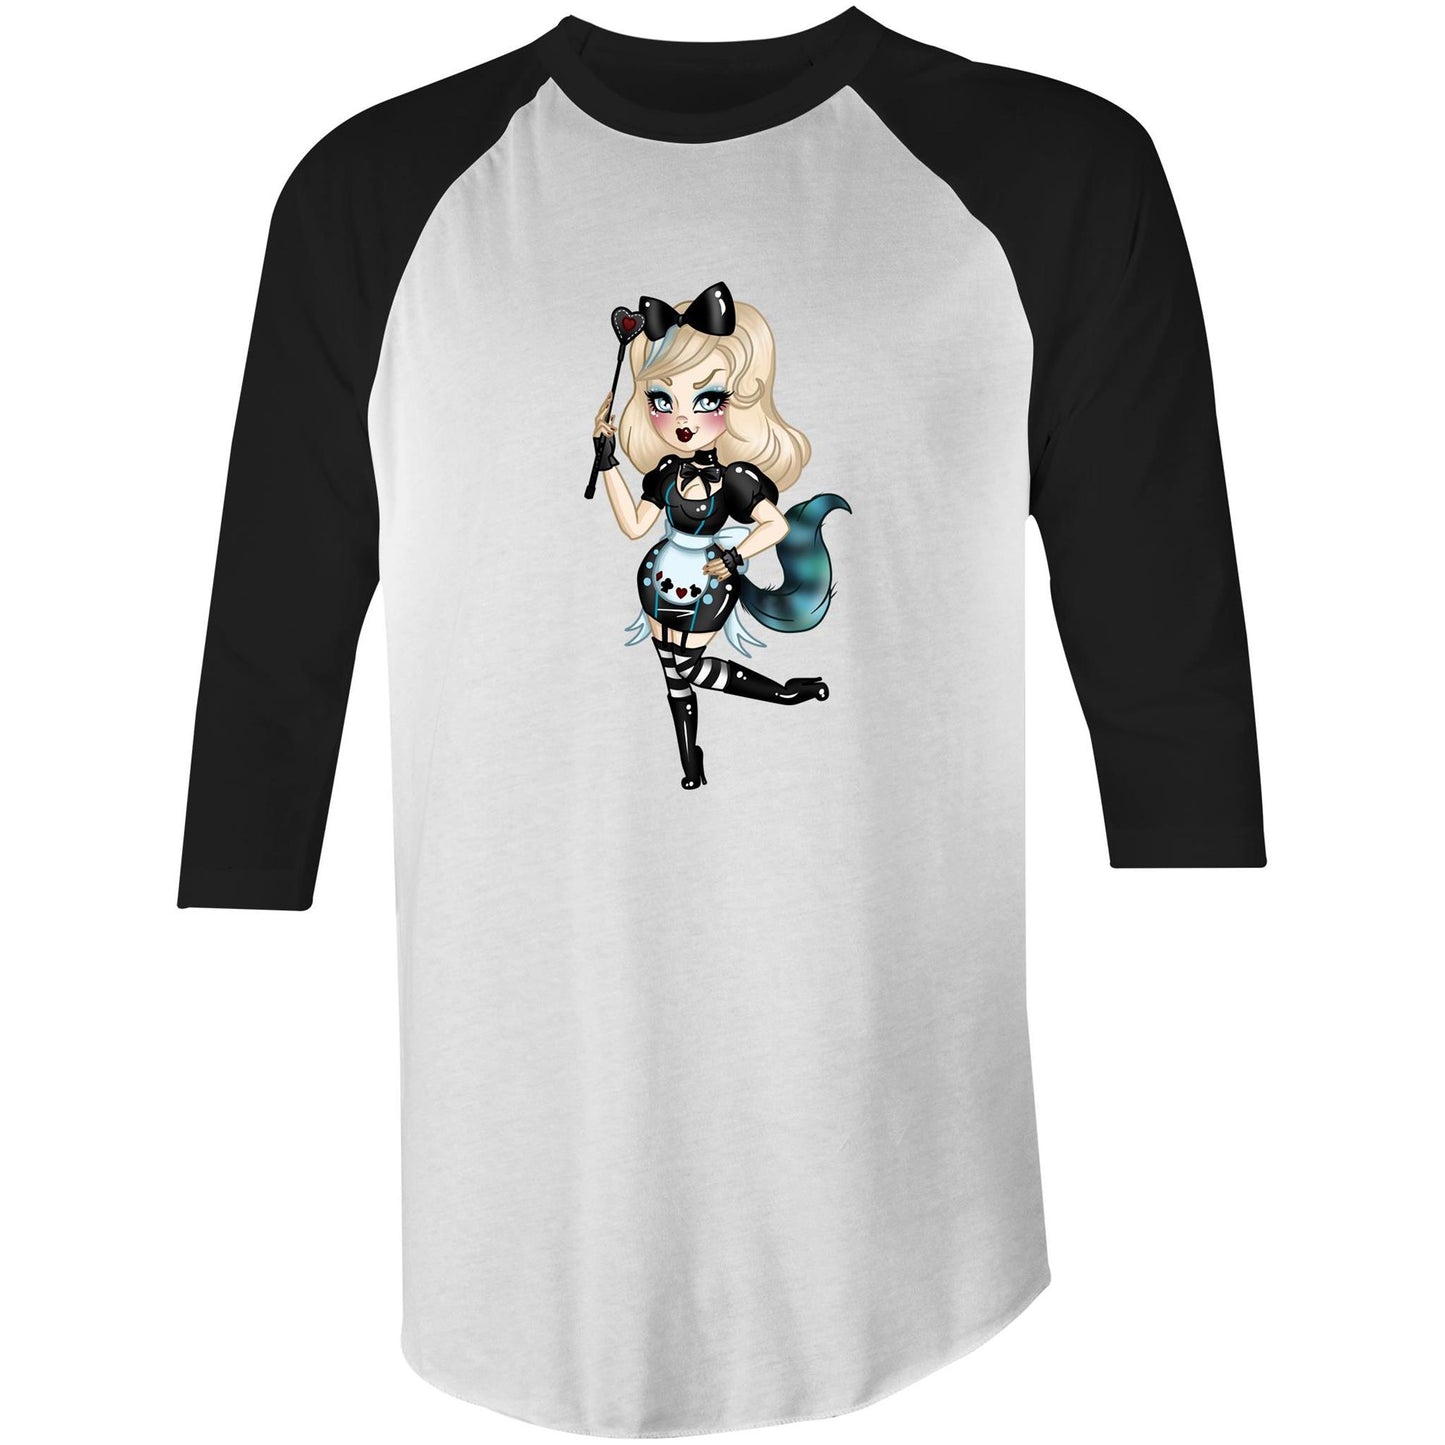 Naughty Alice - 3/4 Sleeve T-Shirt - 2 Colors - Online Ordering Only